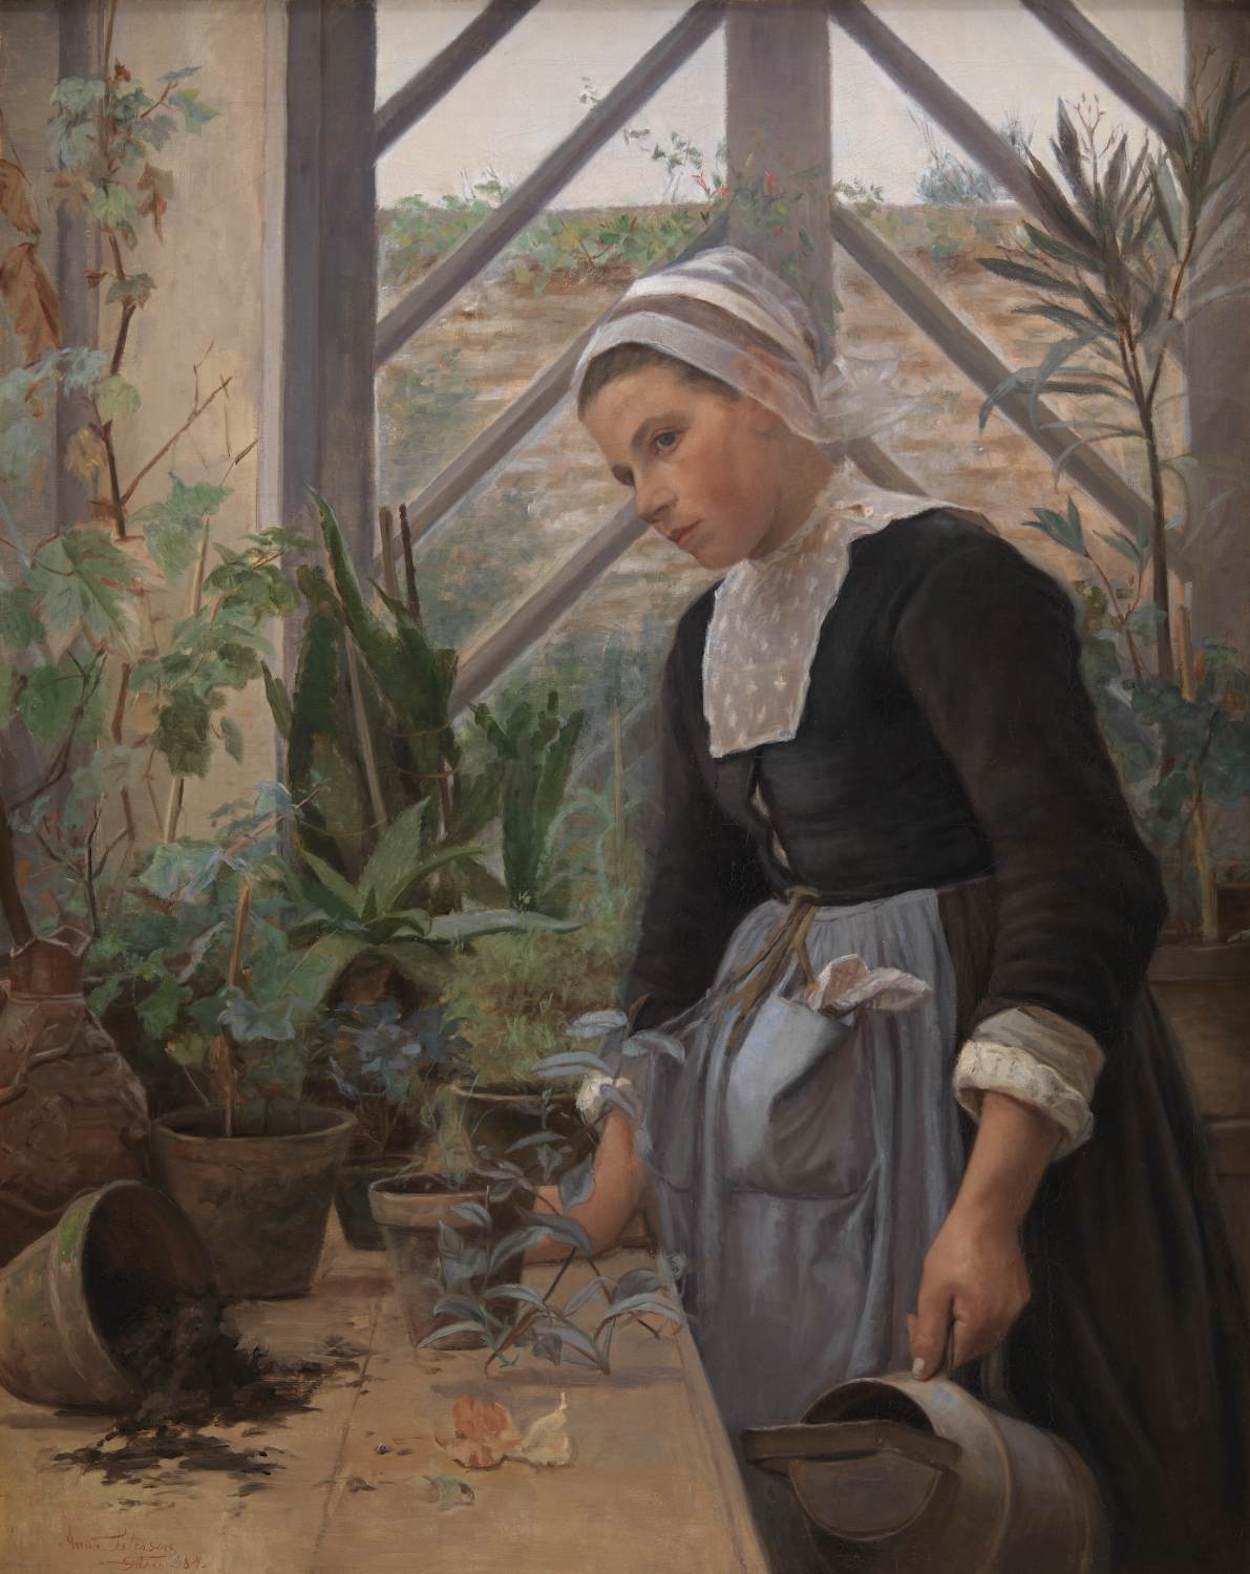 Breton Girl Looking After Plants in the Hothouse by Anna Petersen - 1884 - 121 x 110 cm Statens Museum for Kunst